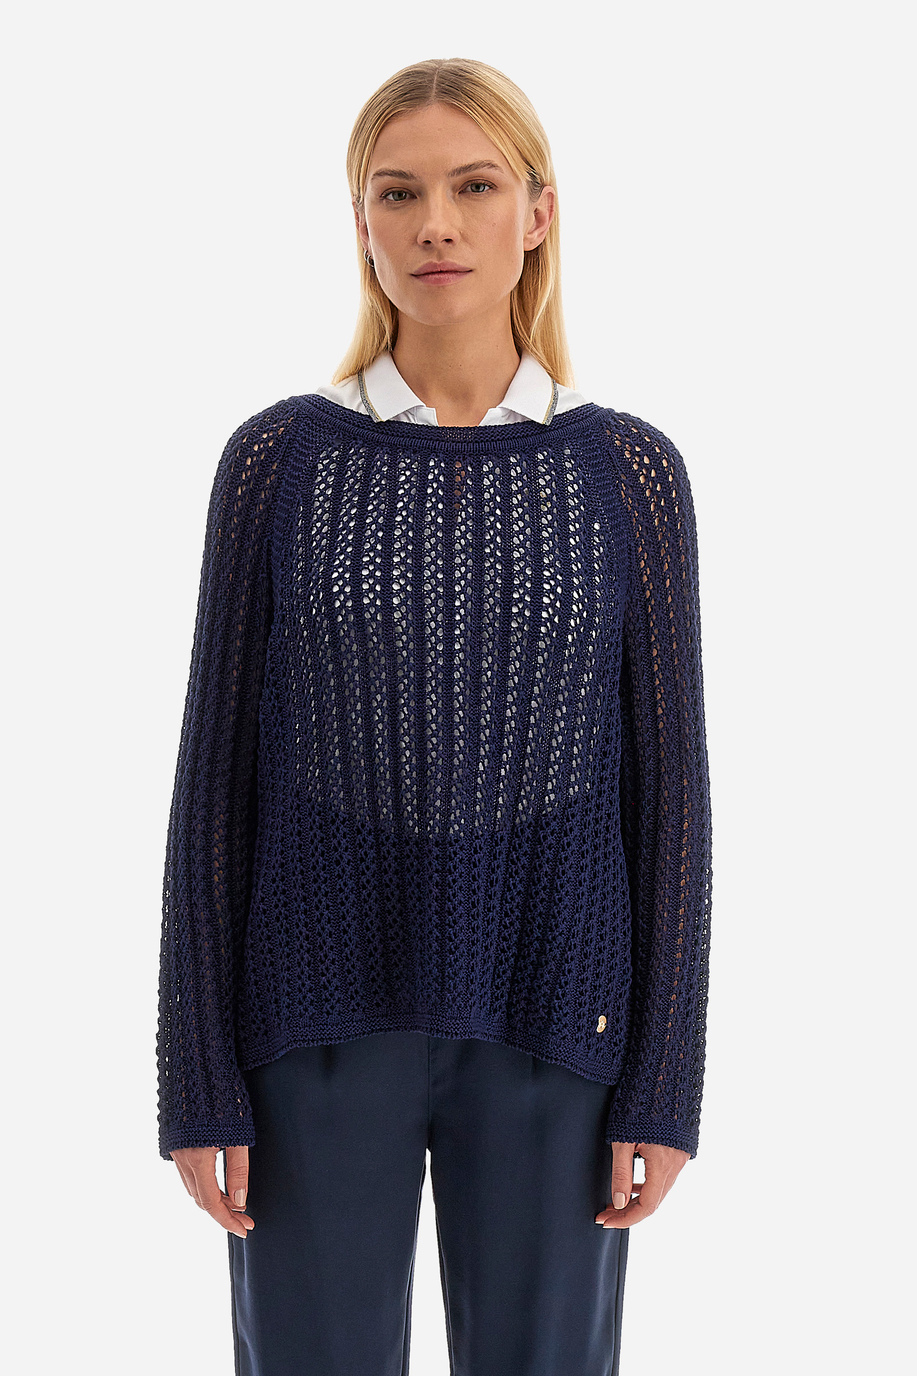 Women's round neck tricot sweater in solid color Spring Weekend capsule - Victoire - Knitwear | La Martina - Official Online Shop